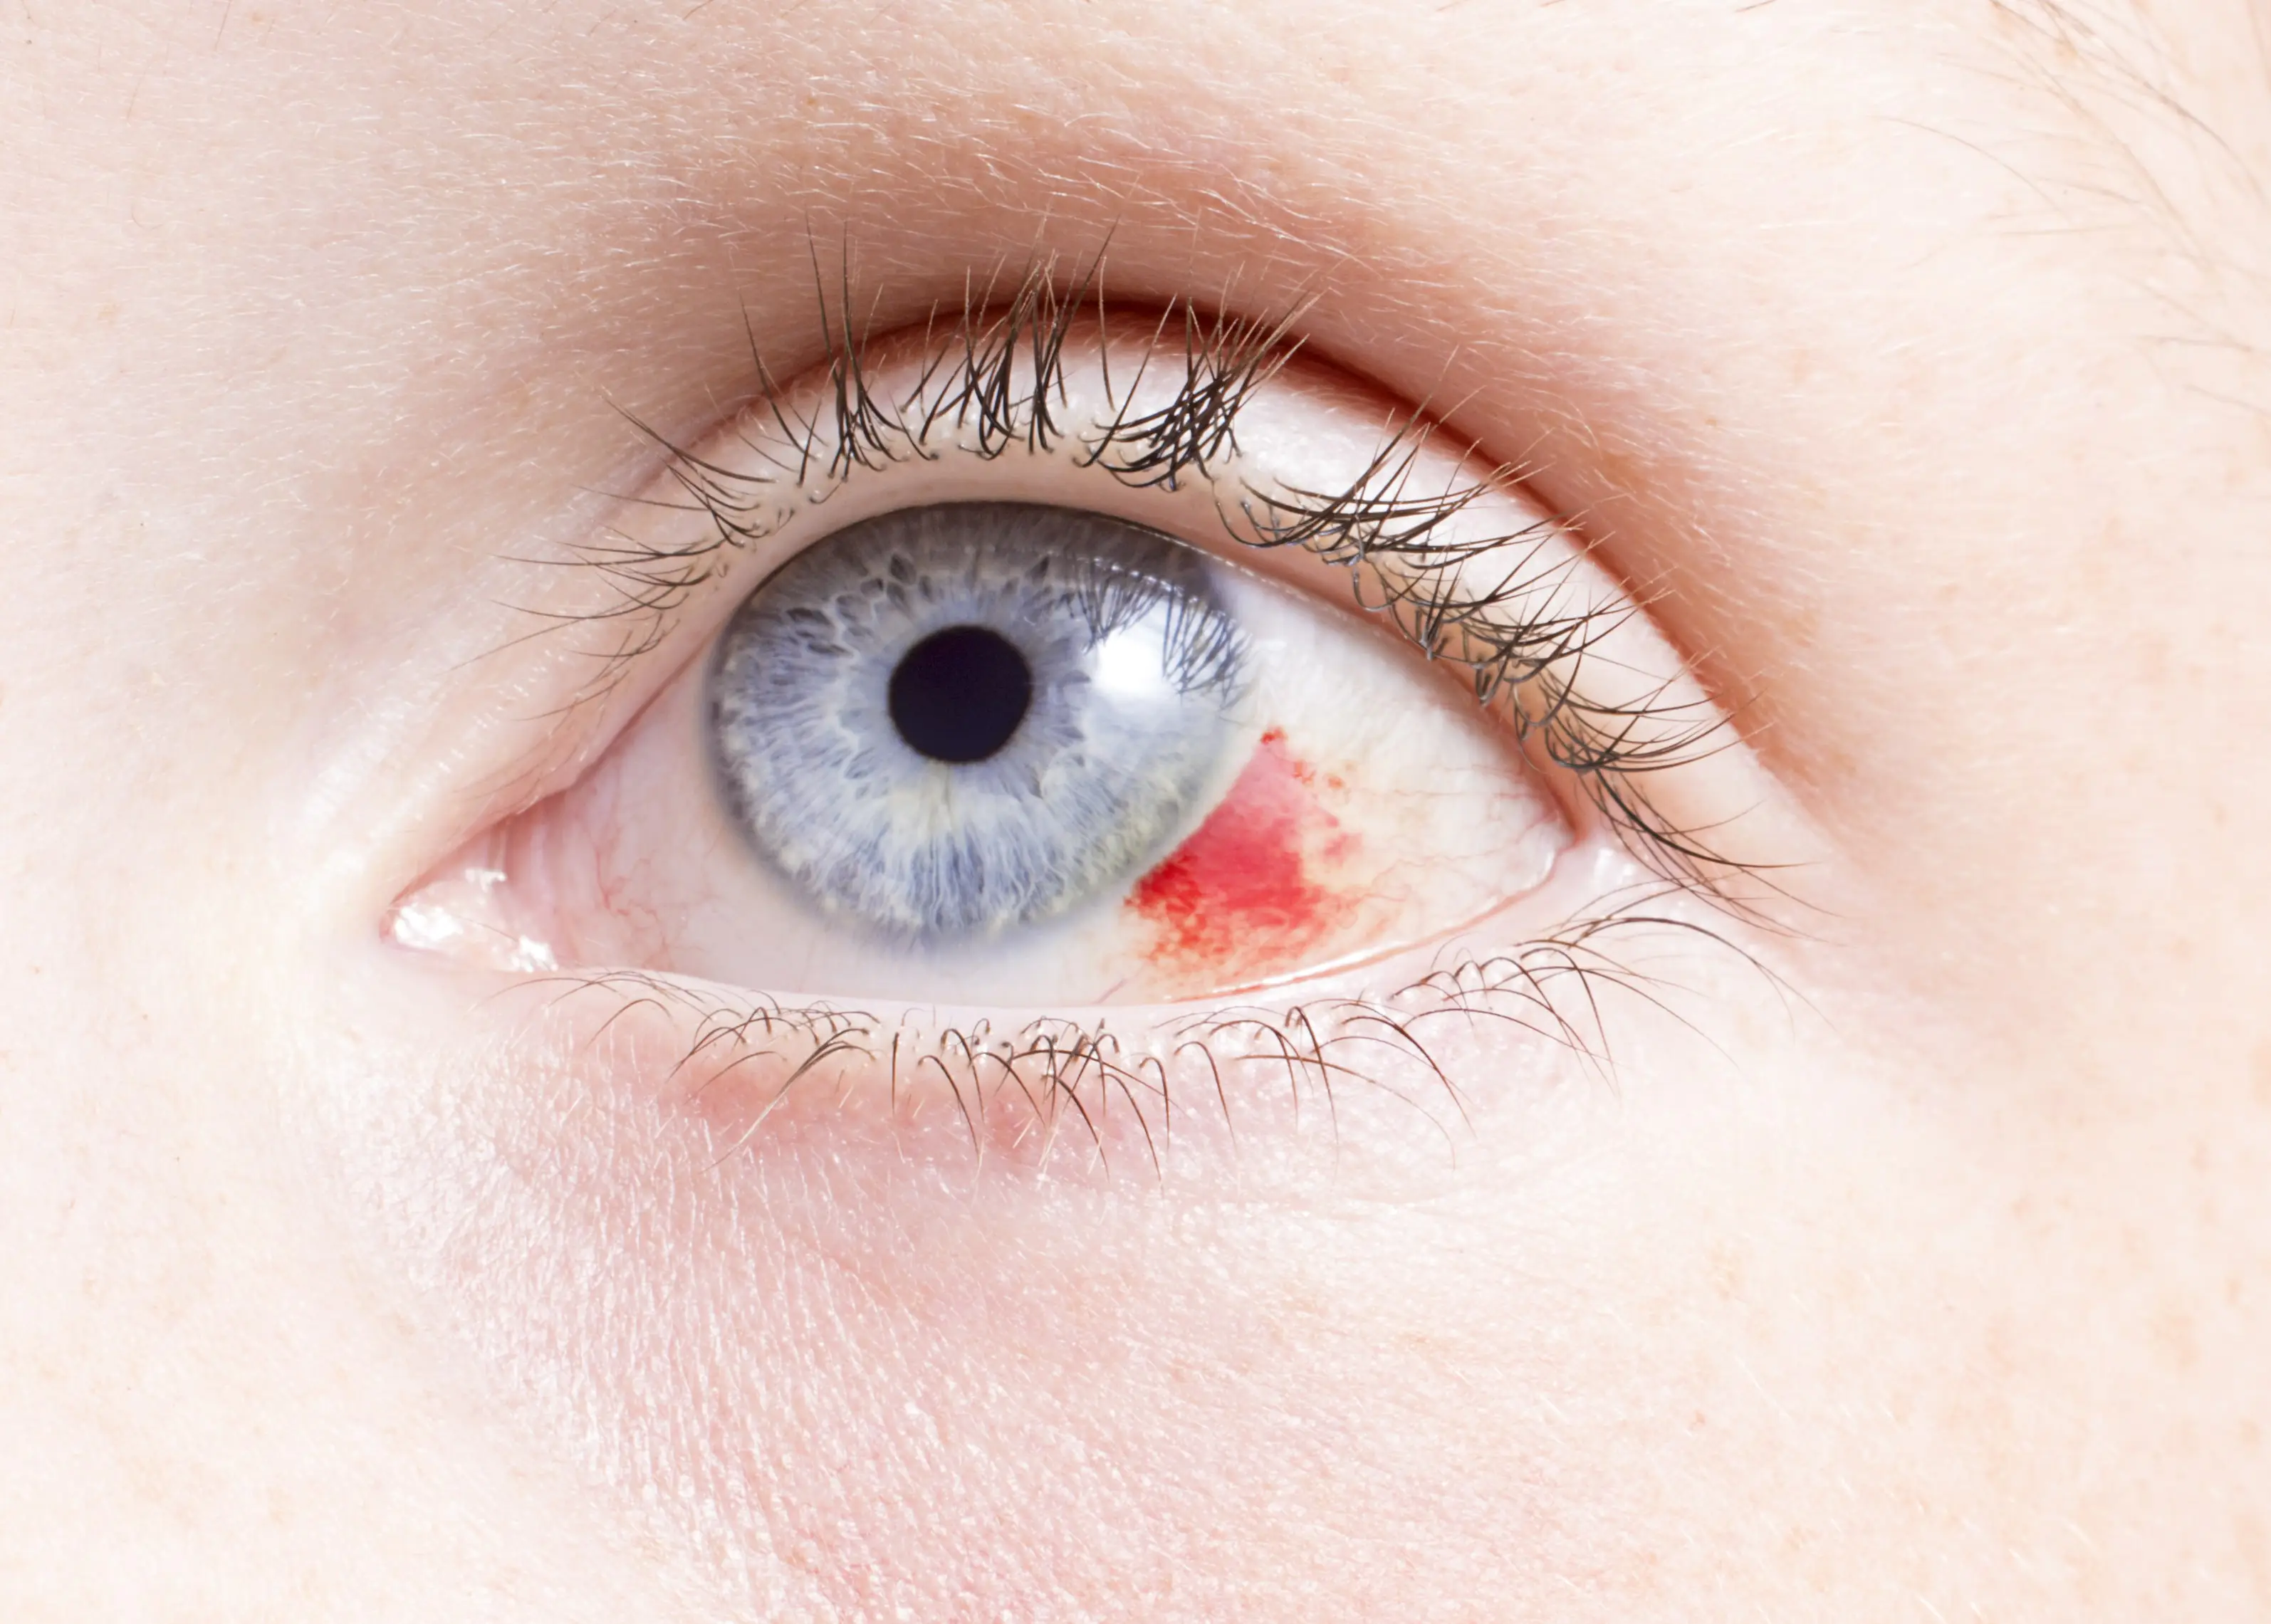 What are the complications of the scratched cornea?